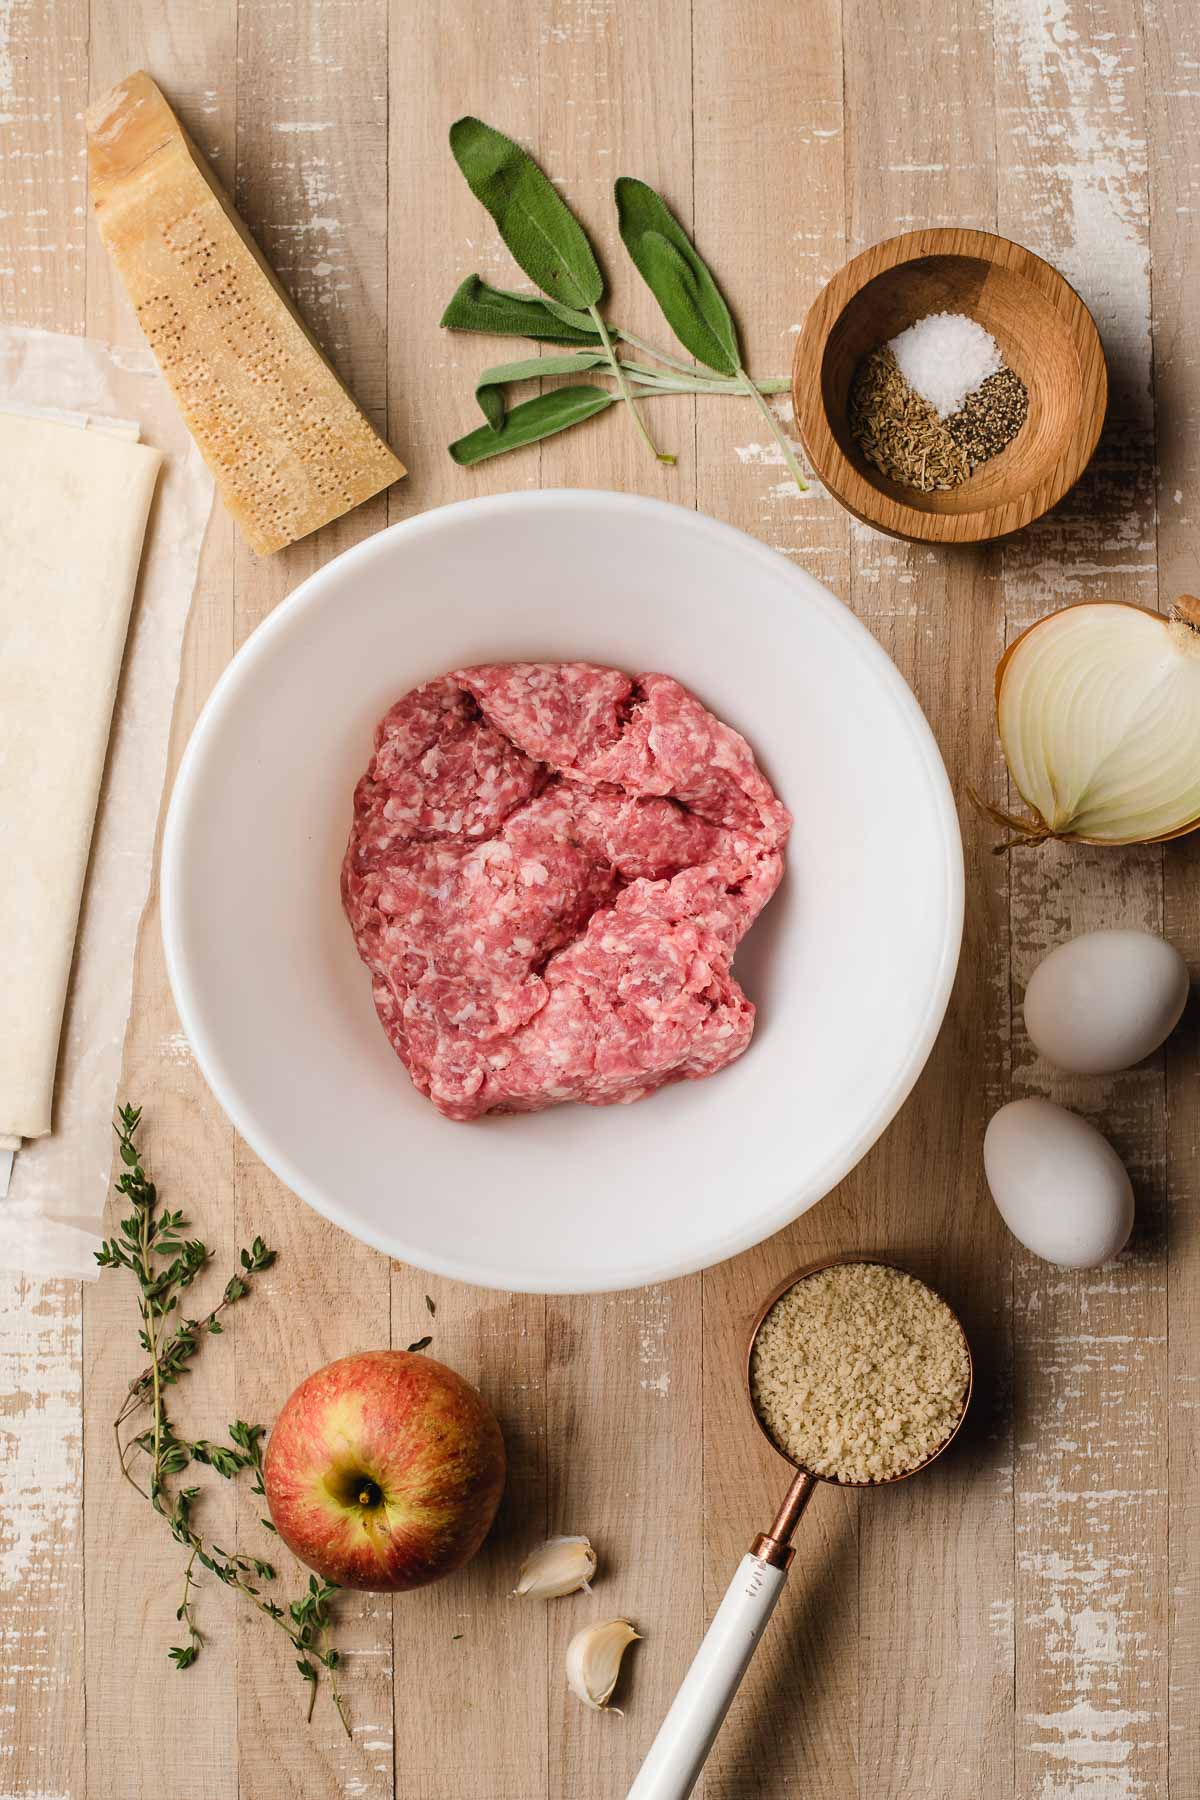 An array of ingredients on a wood background: ground pork, apple, breadcrumbs, eggs, ohions, sage, thyme, Parmesan cheese wedge, and puff pastry.